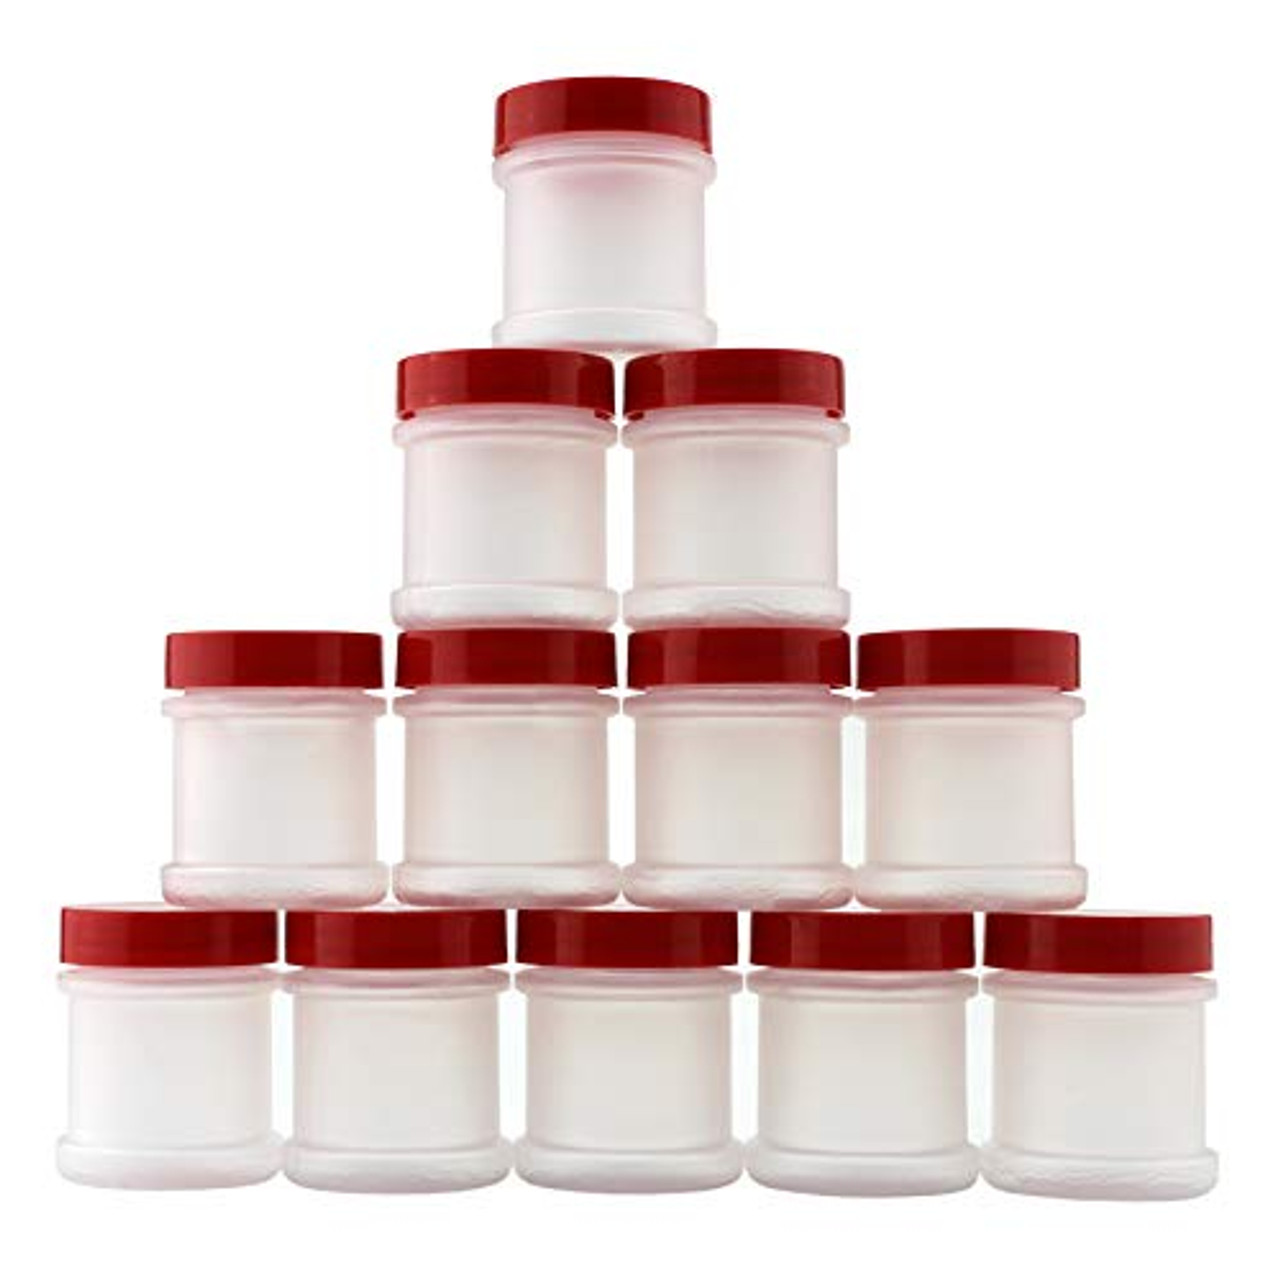 Cornucopia Mini Plastic Spice Jars w/Sifters (12-Pack); 2 Tablespoon Capacity (1 Fluid Ounce) Spice Bottles for Travel, Glitter, Gifts, Favors Red